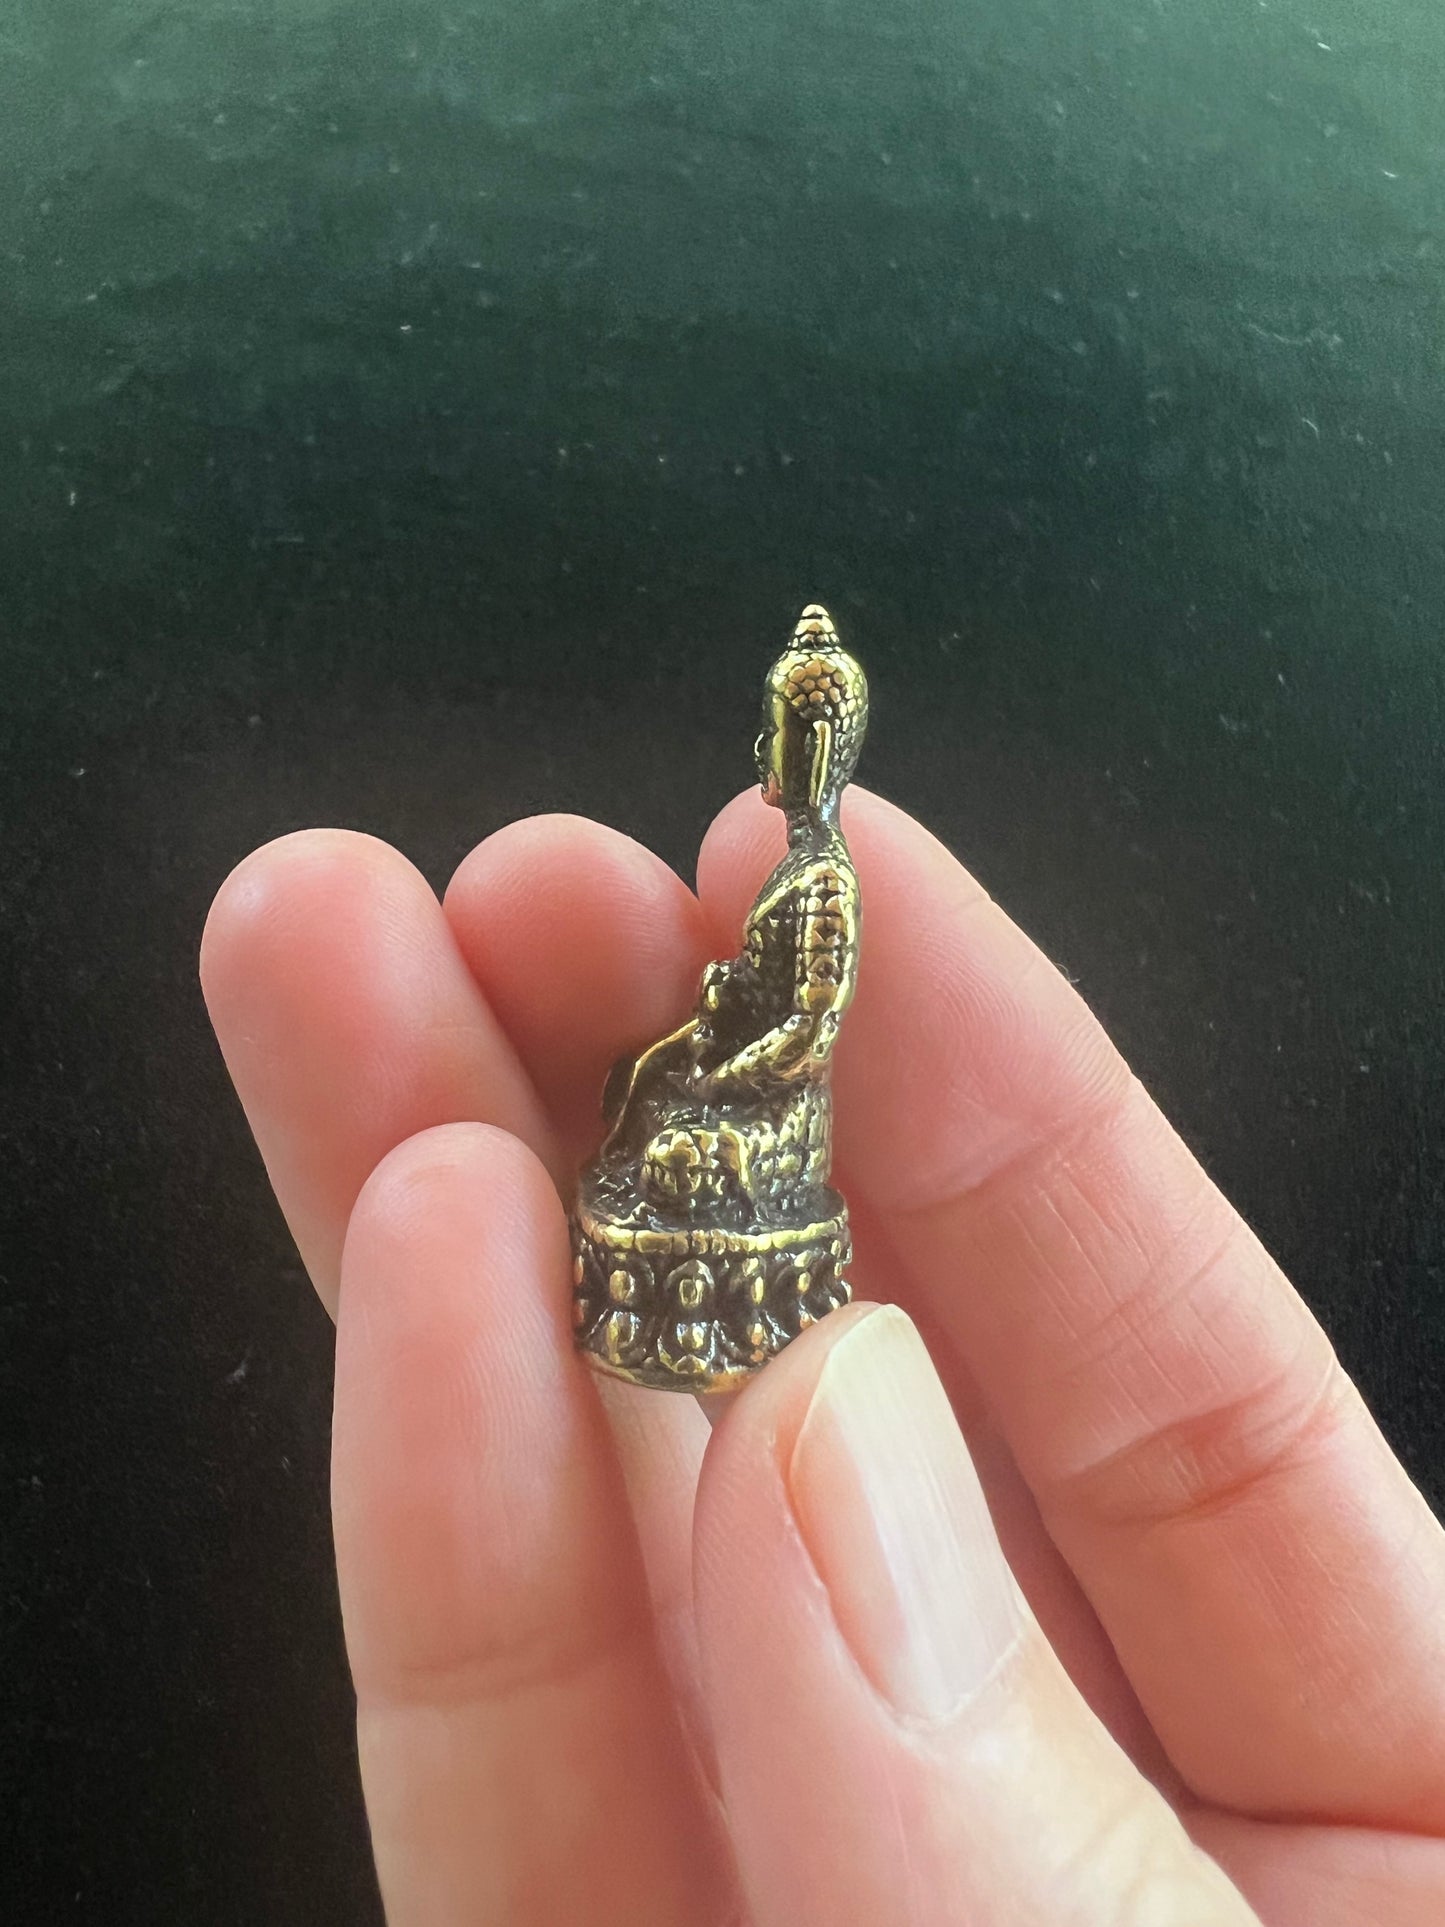 Small Medicine Buddha Statue | Handmade | 1.75 inches by 1 inches